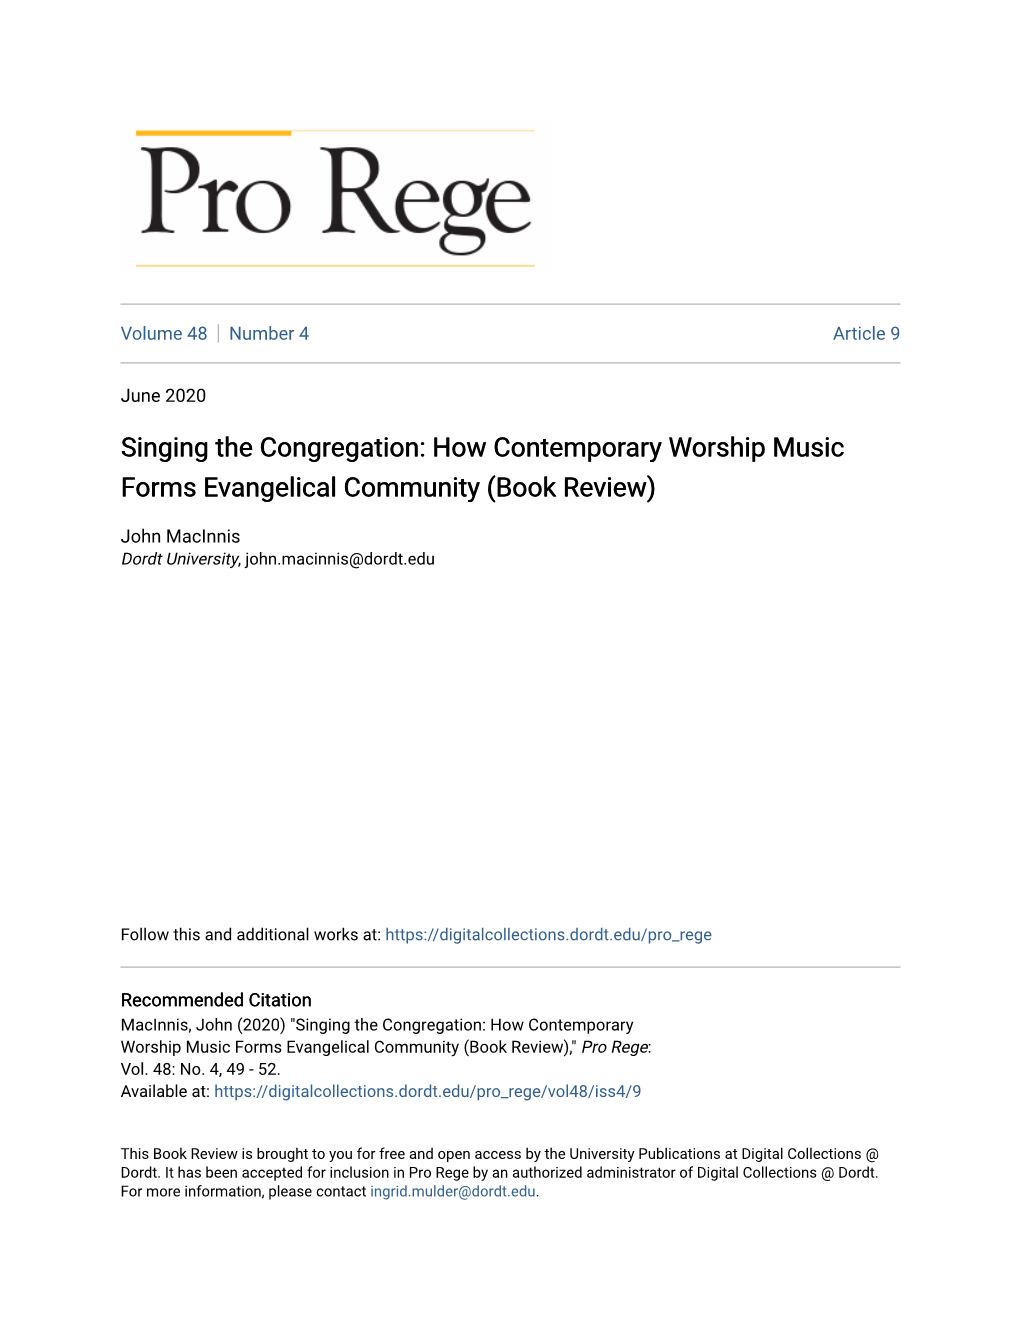 How Contemporary Worship Music Forms Evangelical Community (Book Review)